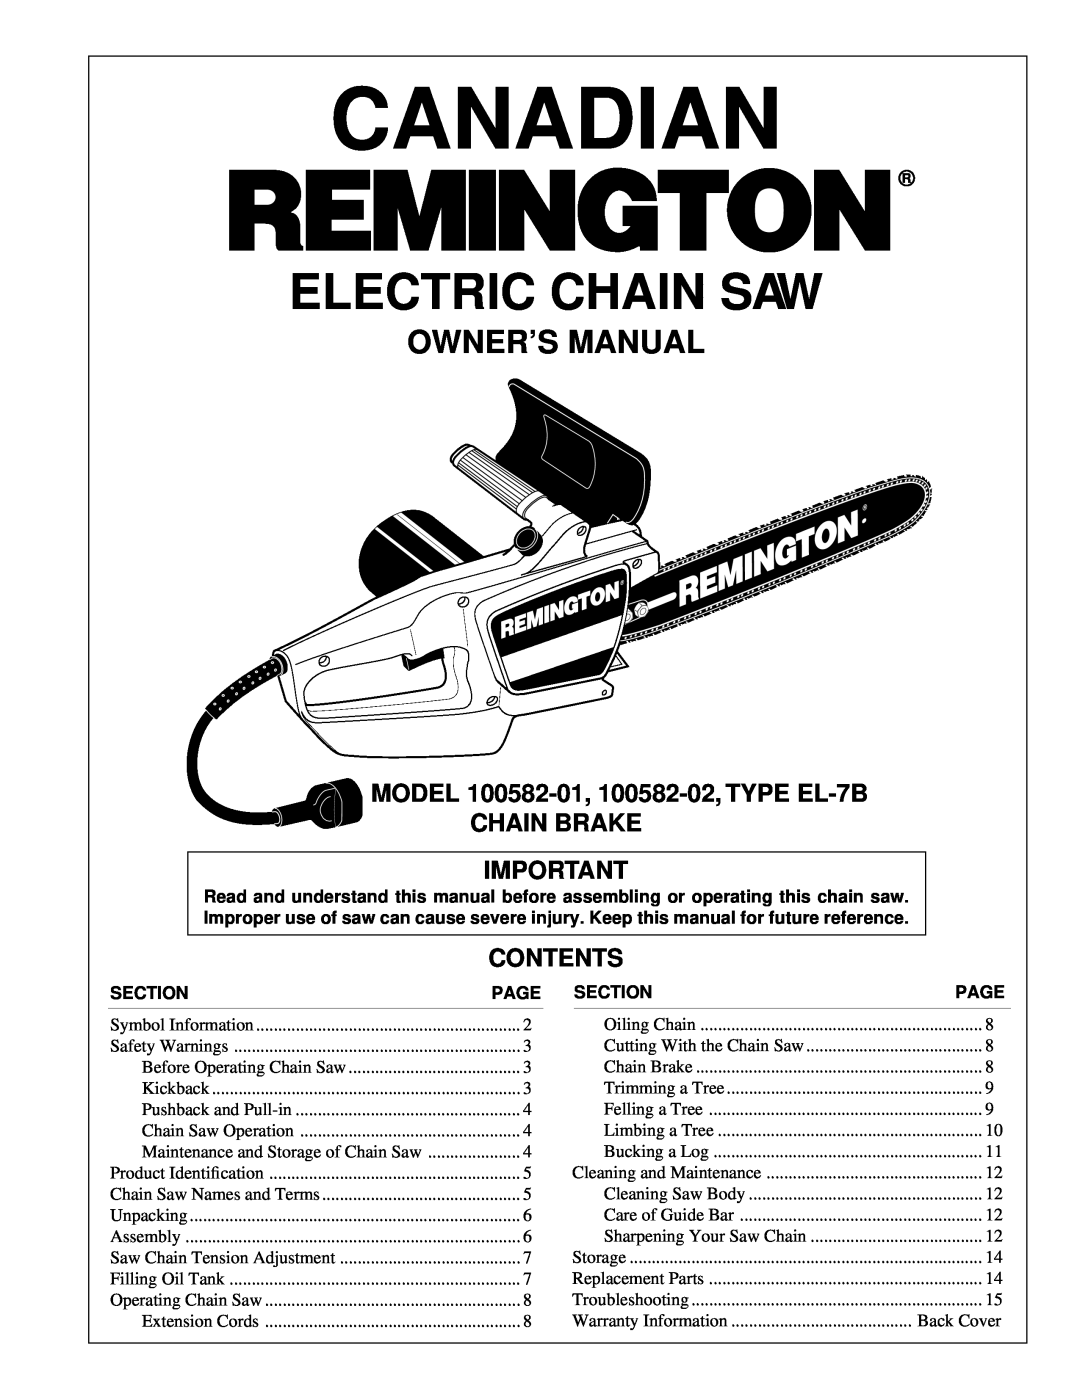 Remington 100582-01, 100582-02, EL-7B owner manual Canadian, Electric Chain Saw, Contents 